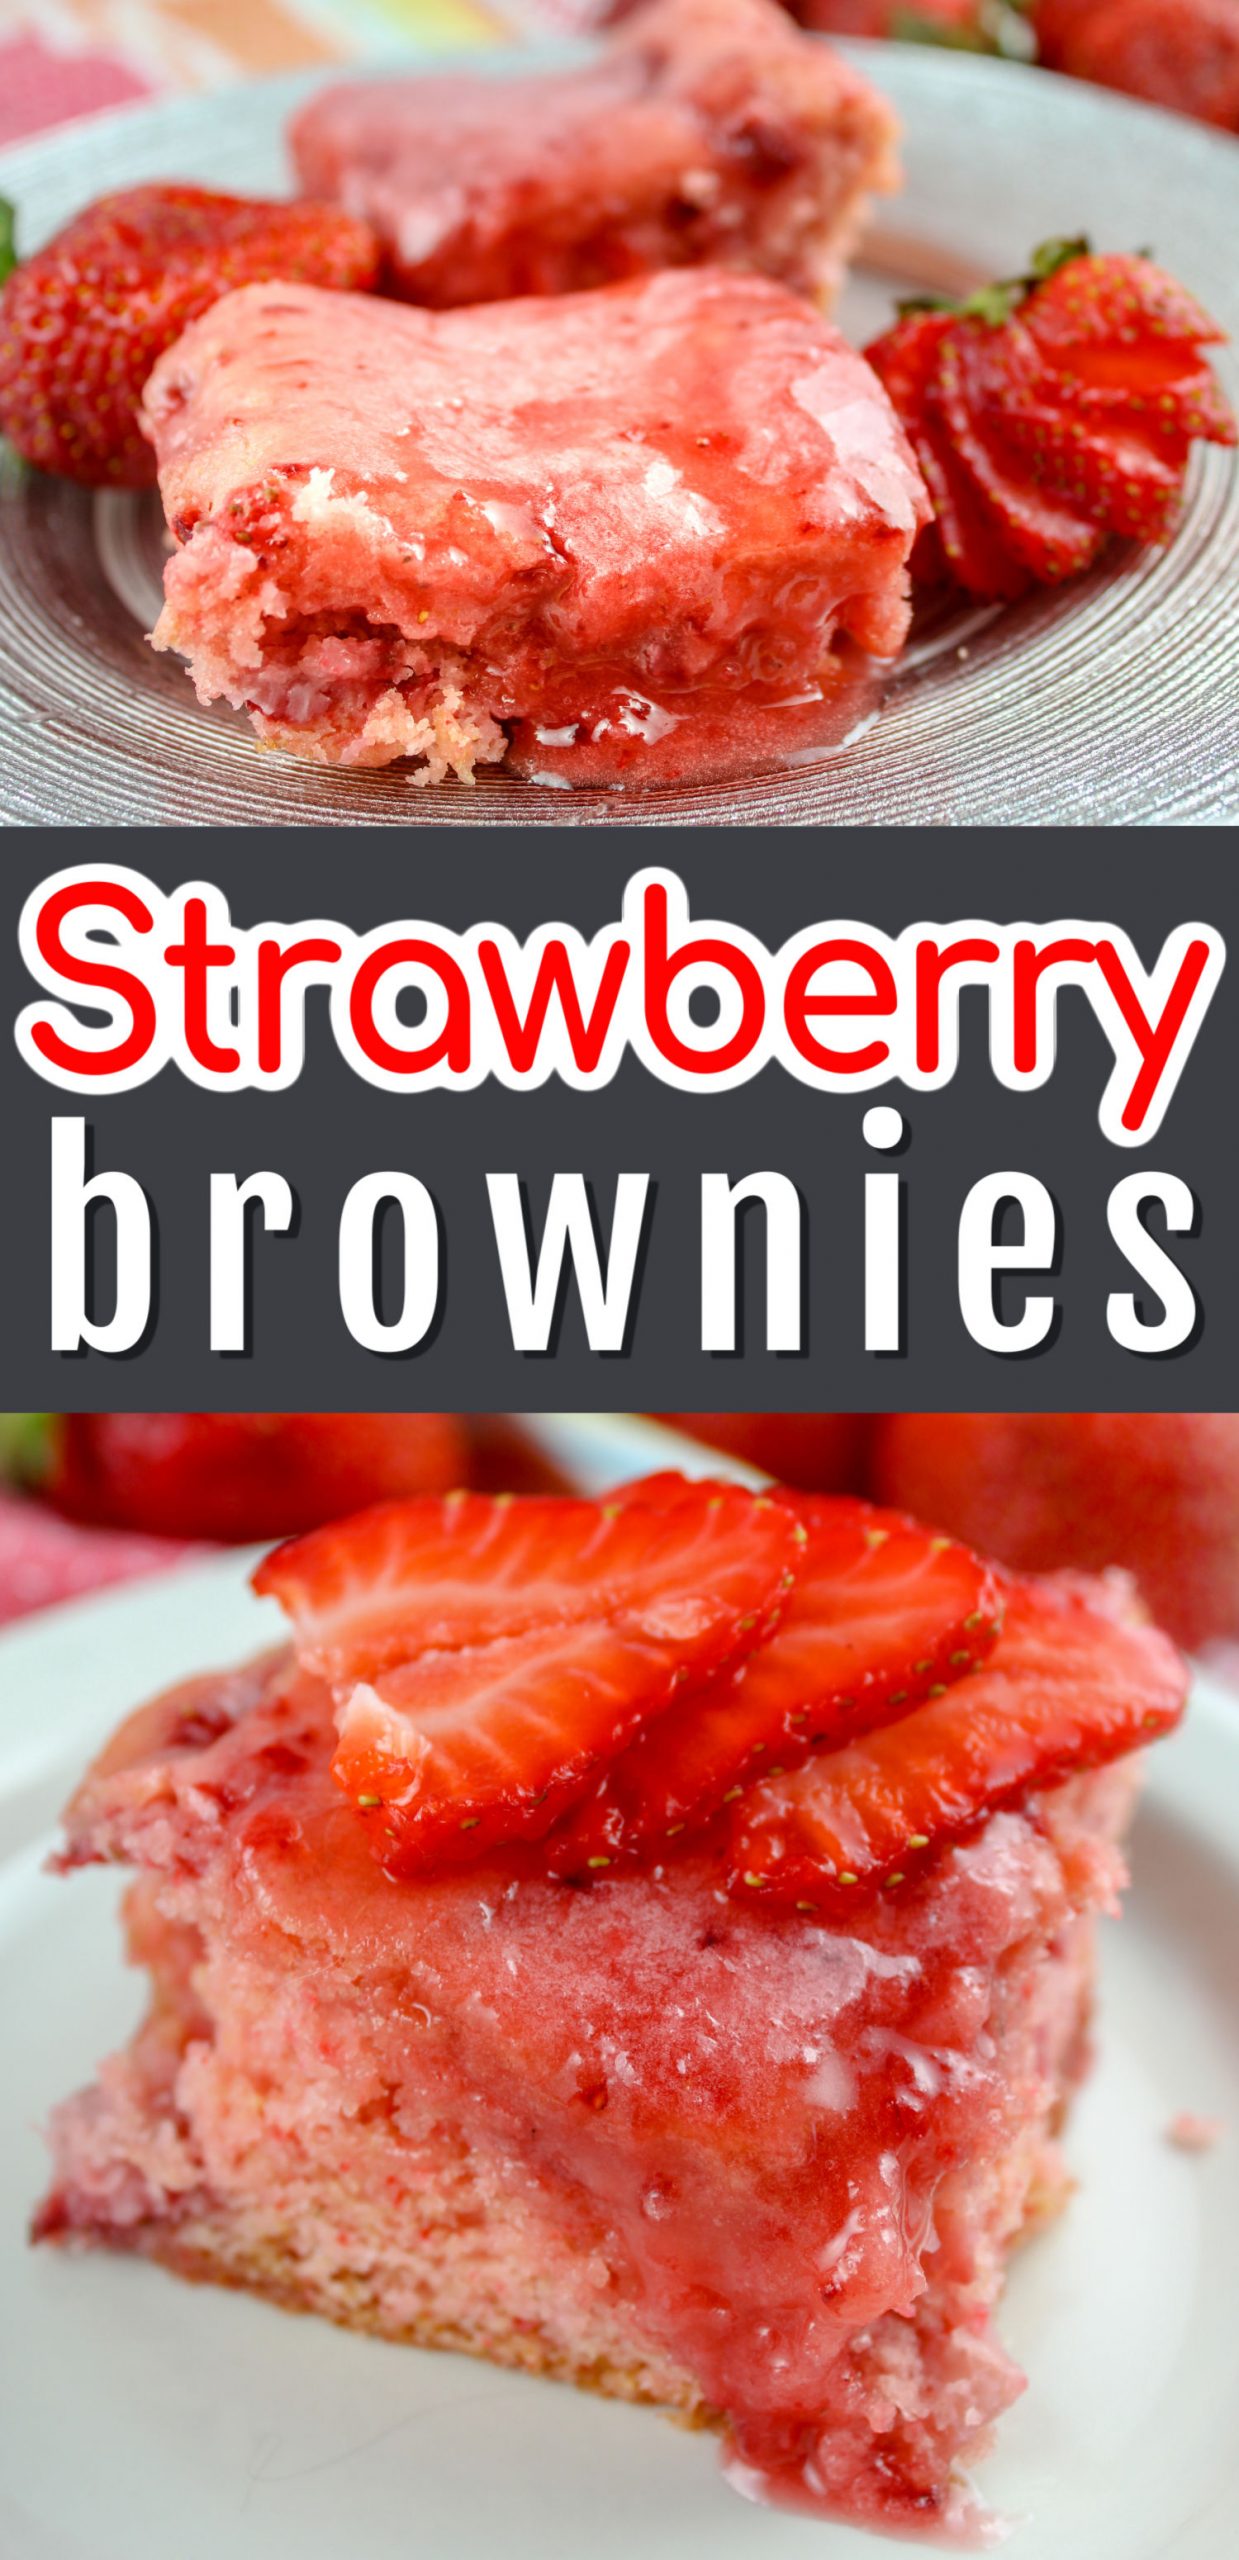 If you like strawberries - this is the dessert for you! These strawberry brownies have strawberries in the brownie, strawberry batter, strawberry glaze and strawberries on top! Booyah - come to strawberry town!  via @foodhussy